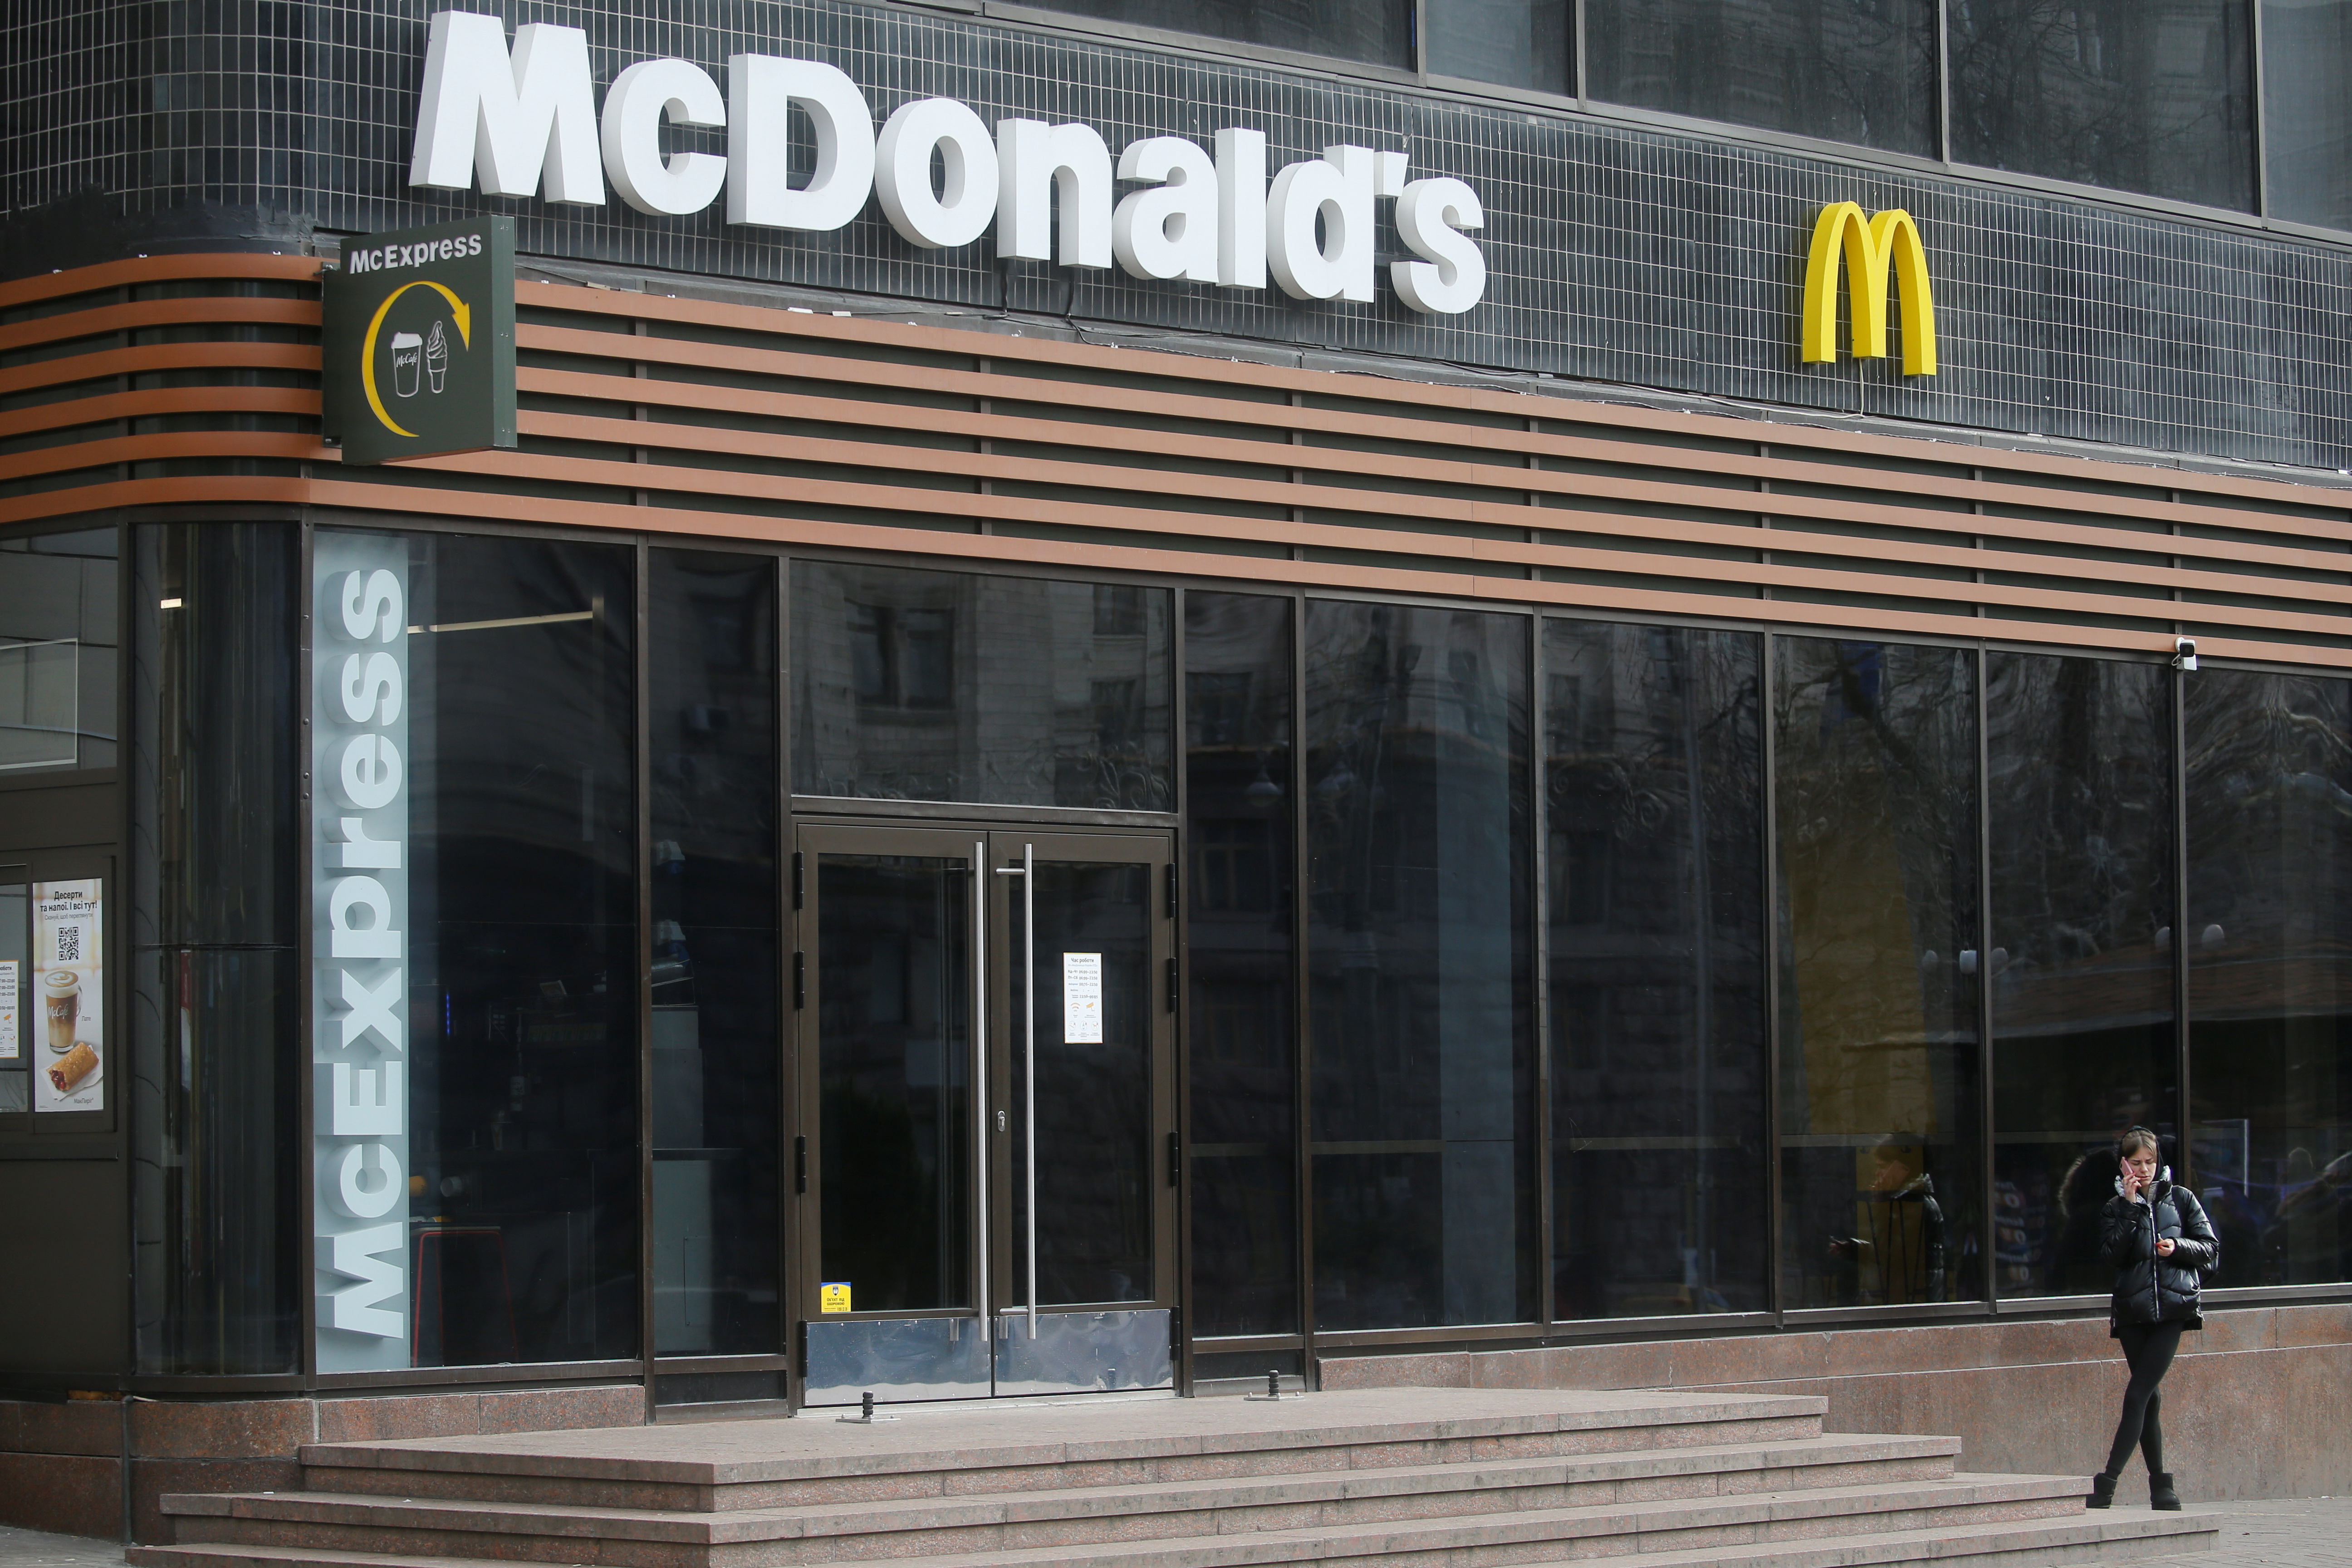 A woman speaks on the phone outside a closed McDonald's restaurant in Kyiv